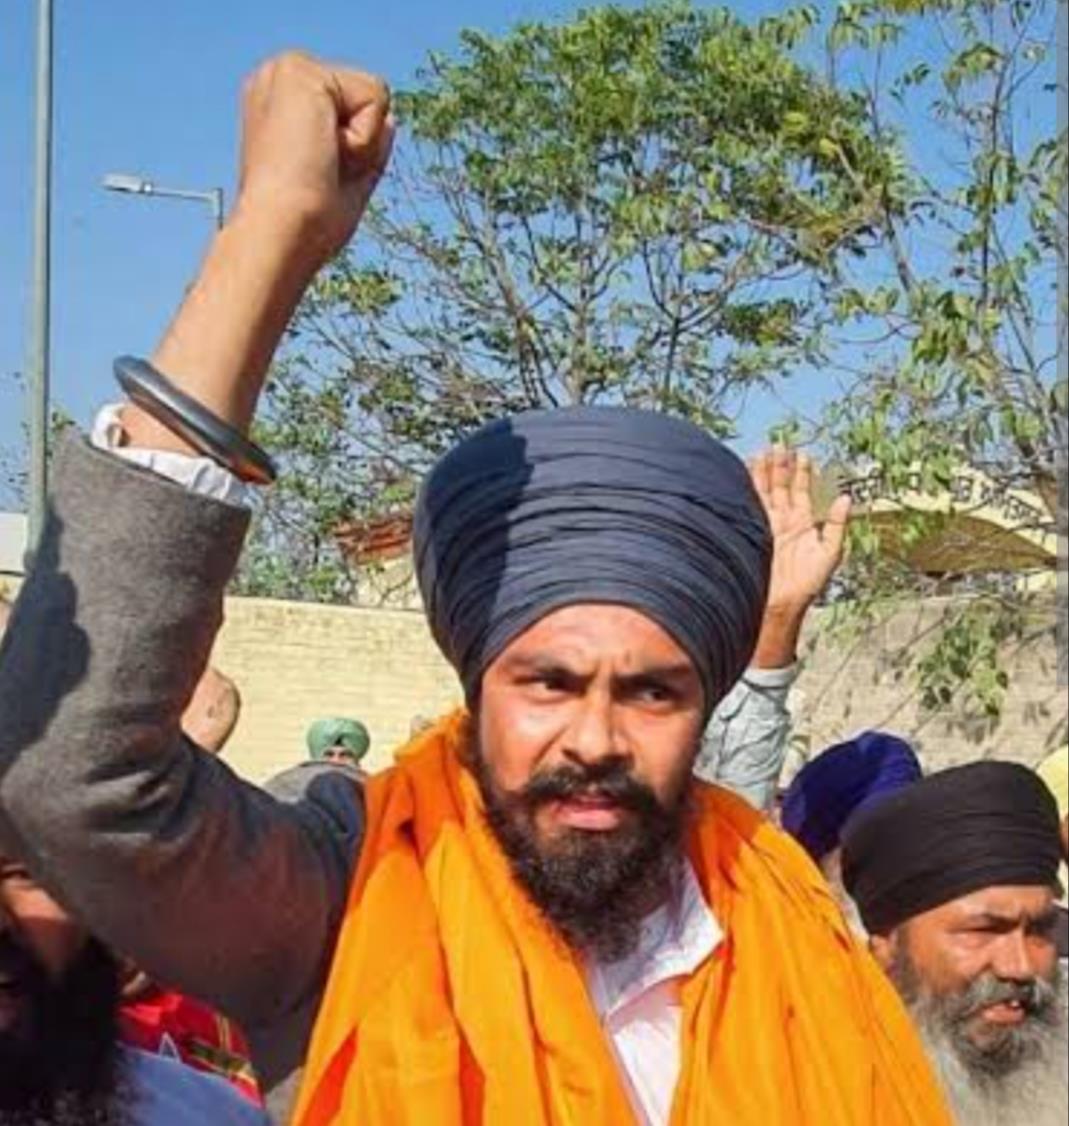 Amritpal’s associate Lovepreet Toofan, who was released following storming of Ajnala police station, goes into hiding